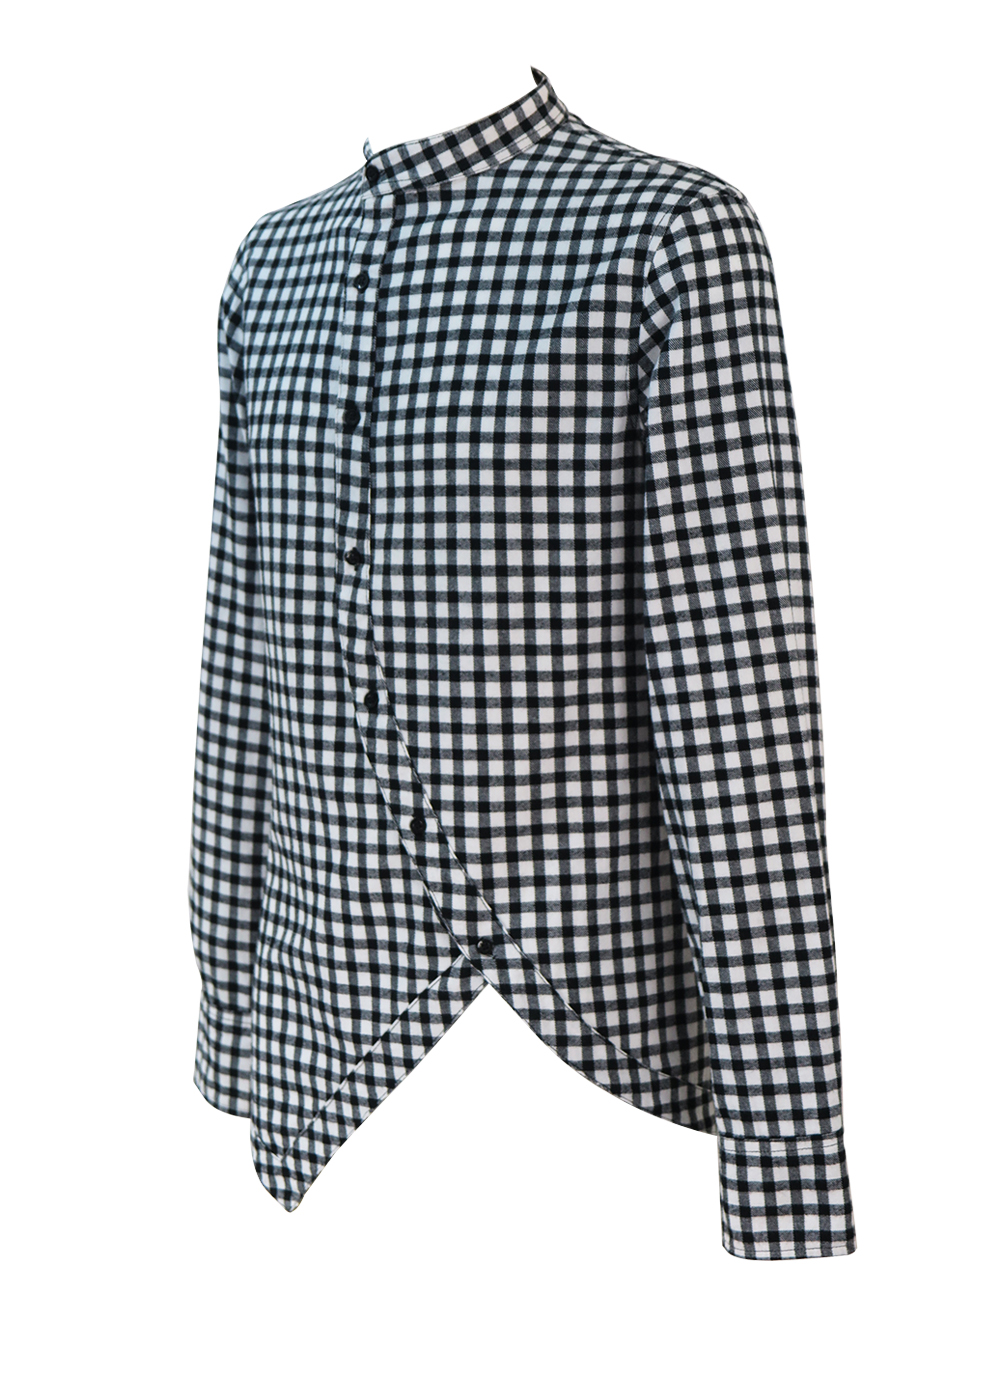 Black & White Check Shirt with a Round Neck Collar and Asymmetric ...